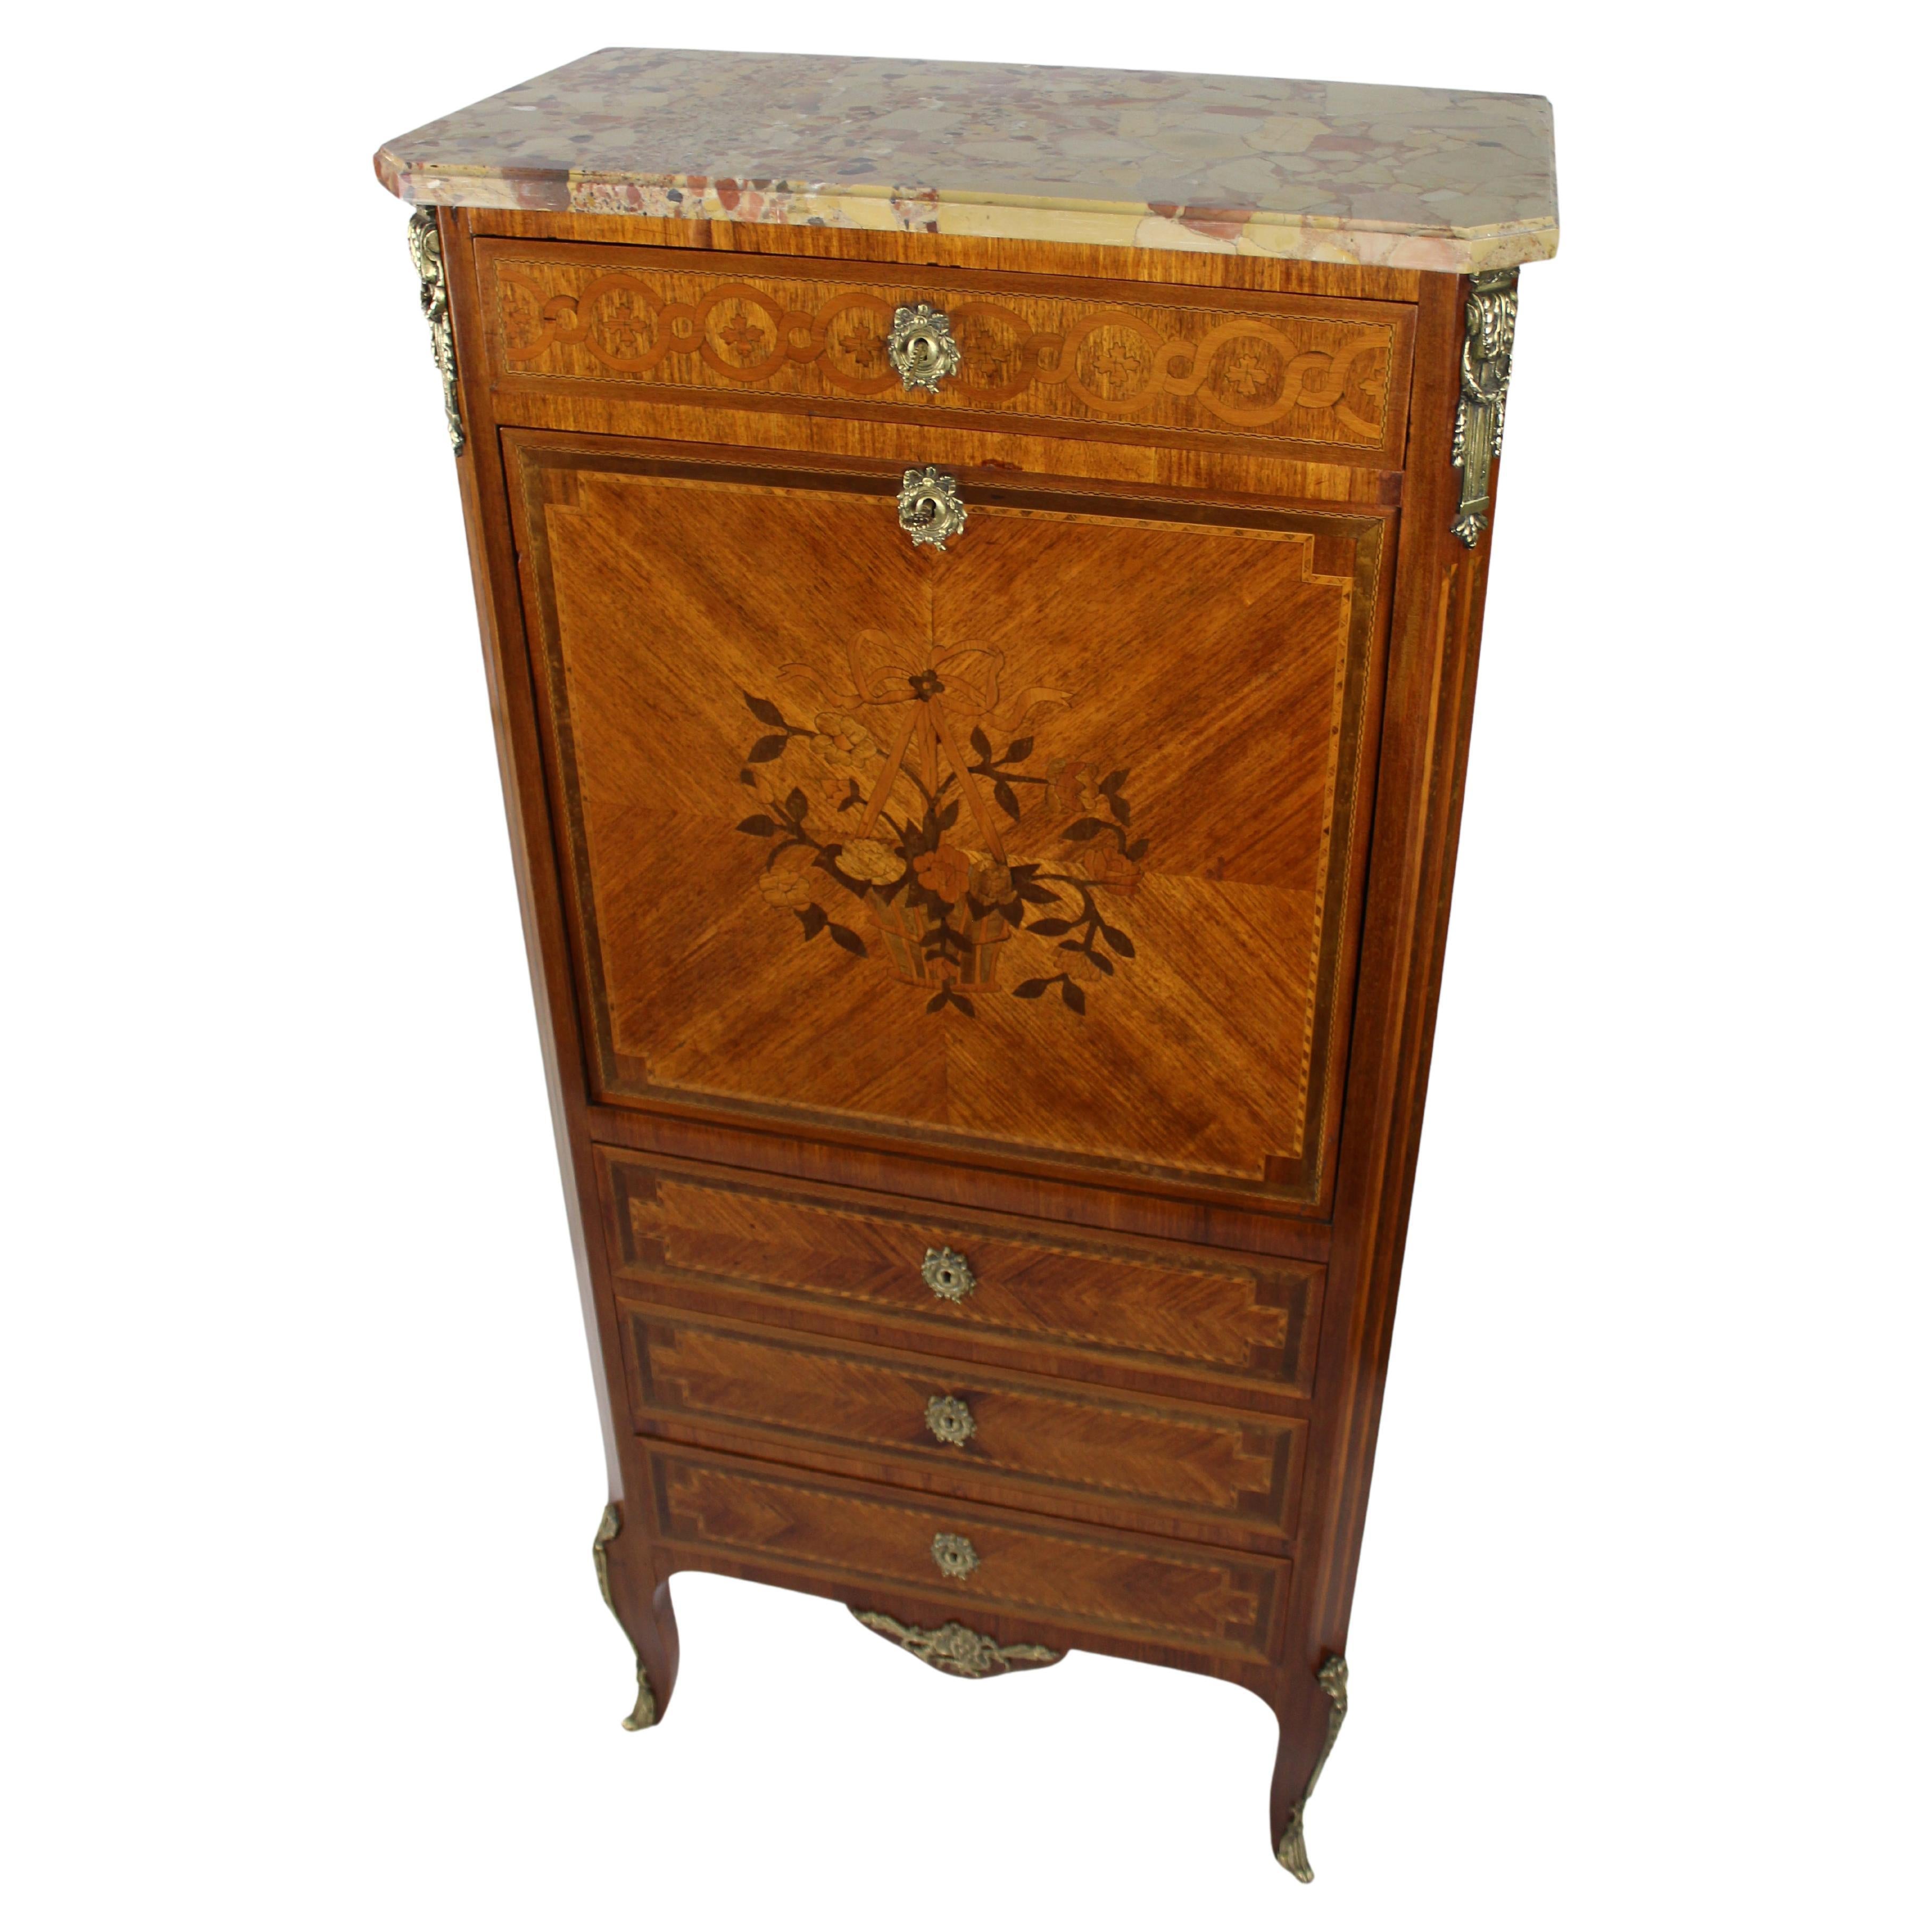 19th c. French Marble Topped Inlaid Escritoire For Sale